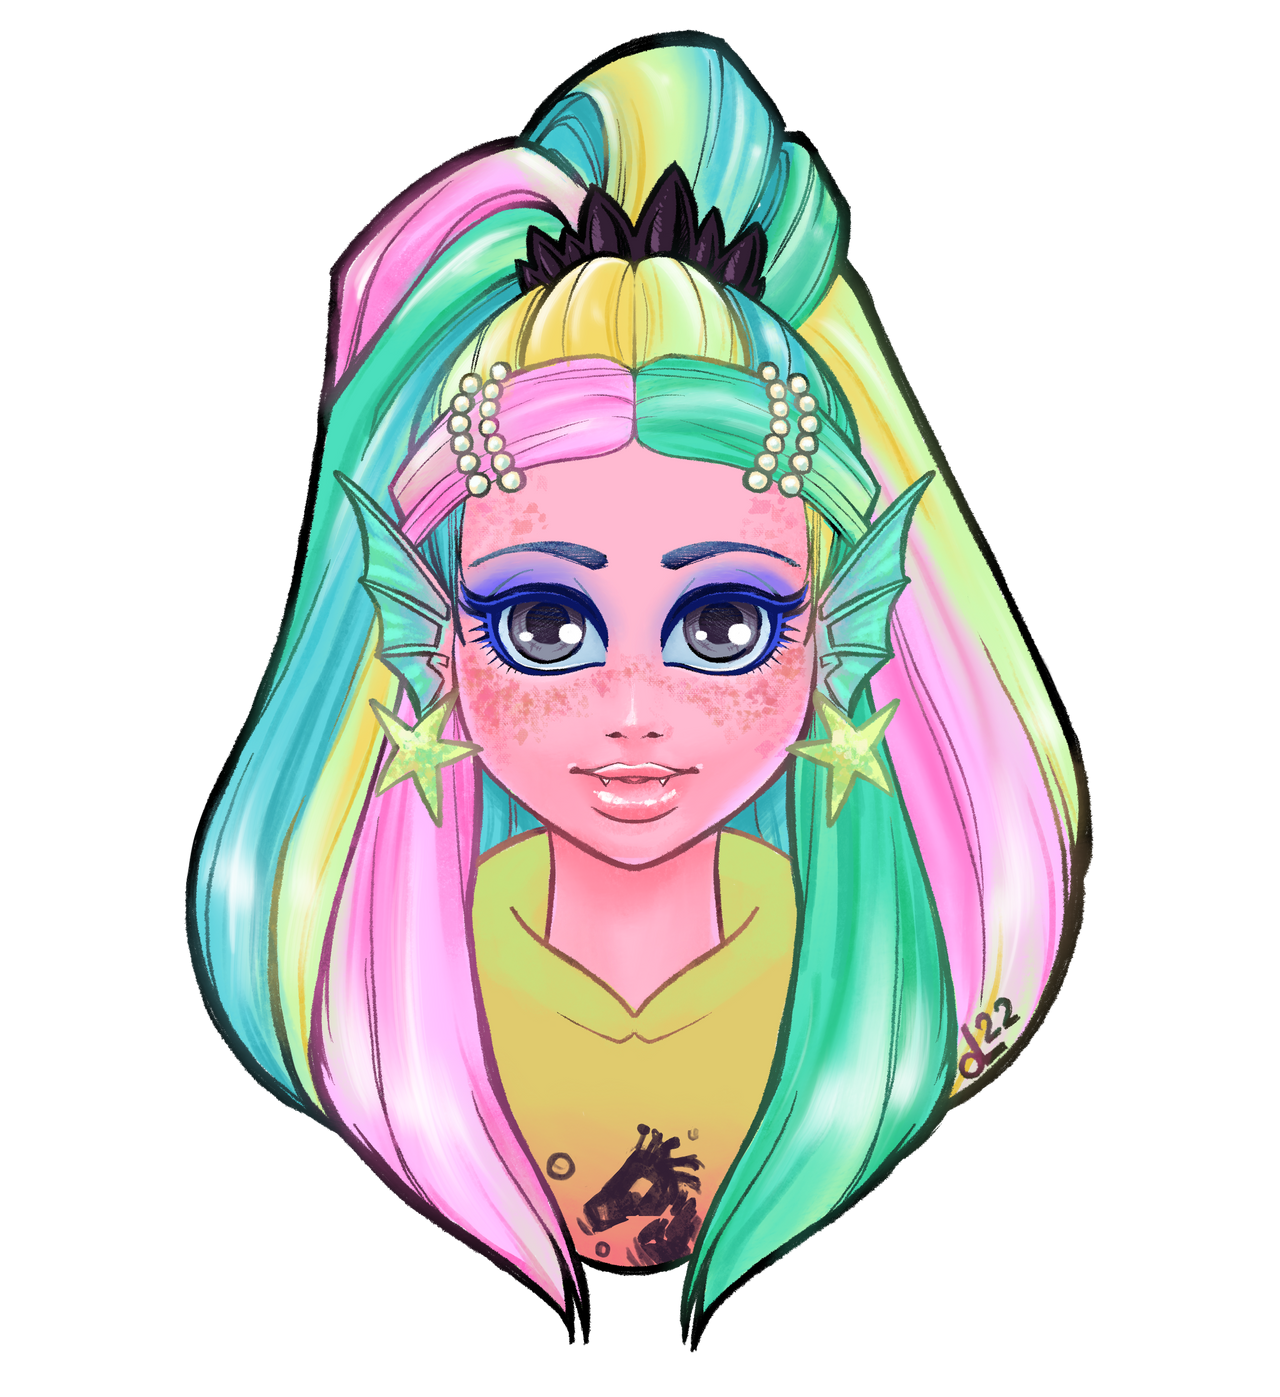 Lagoona Blue from Monster High color by AzZzAeLL on DeviantArt